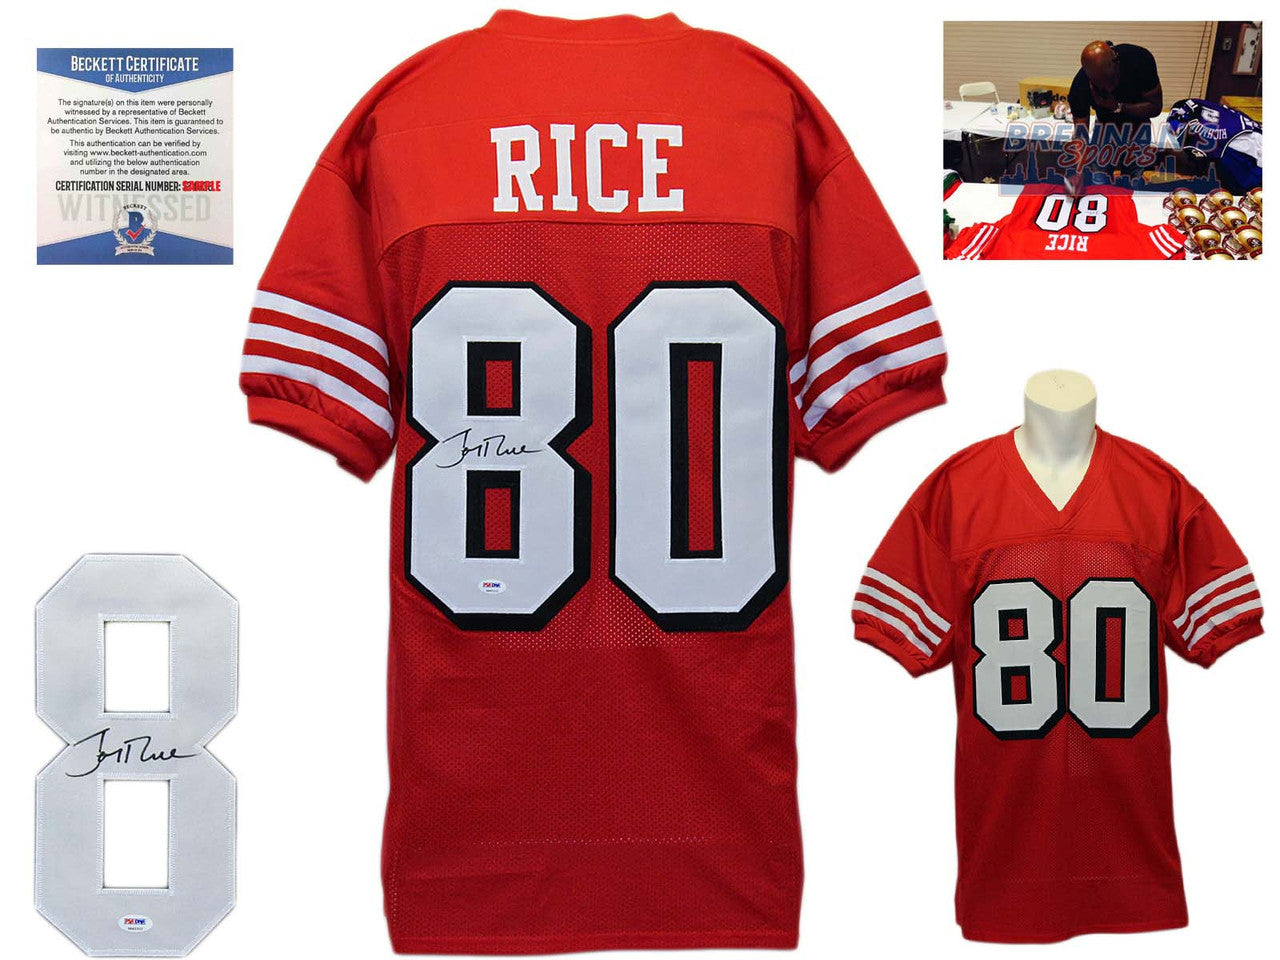 Jerry Rice Autographed Signed Jersey - TB